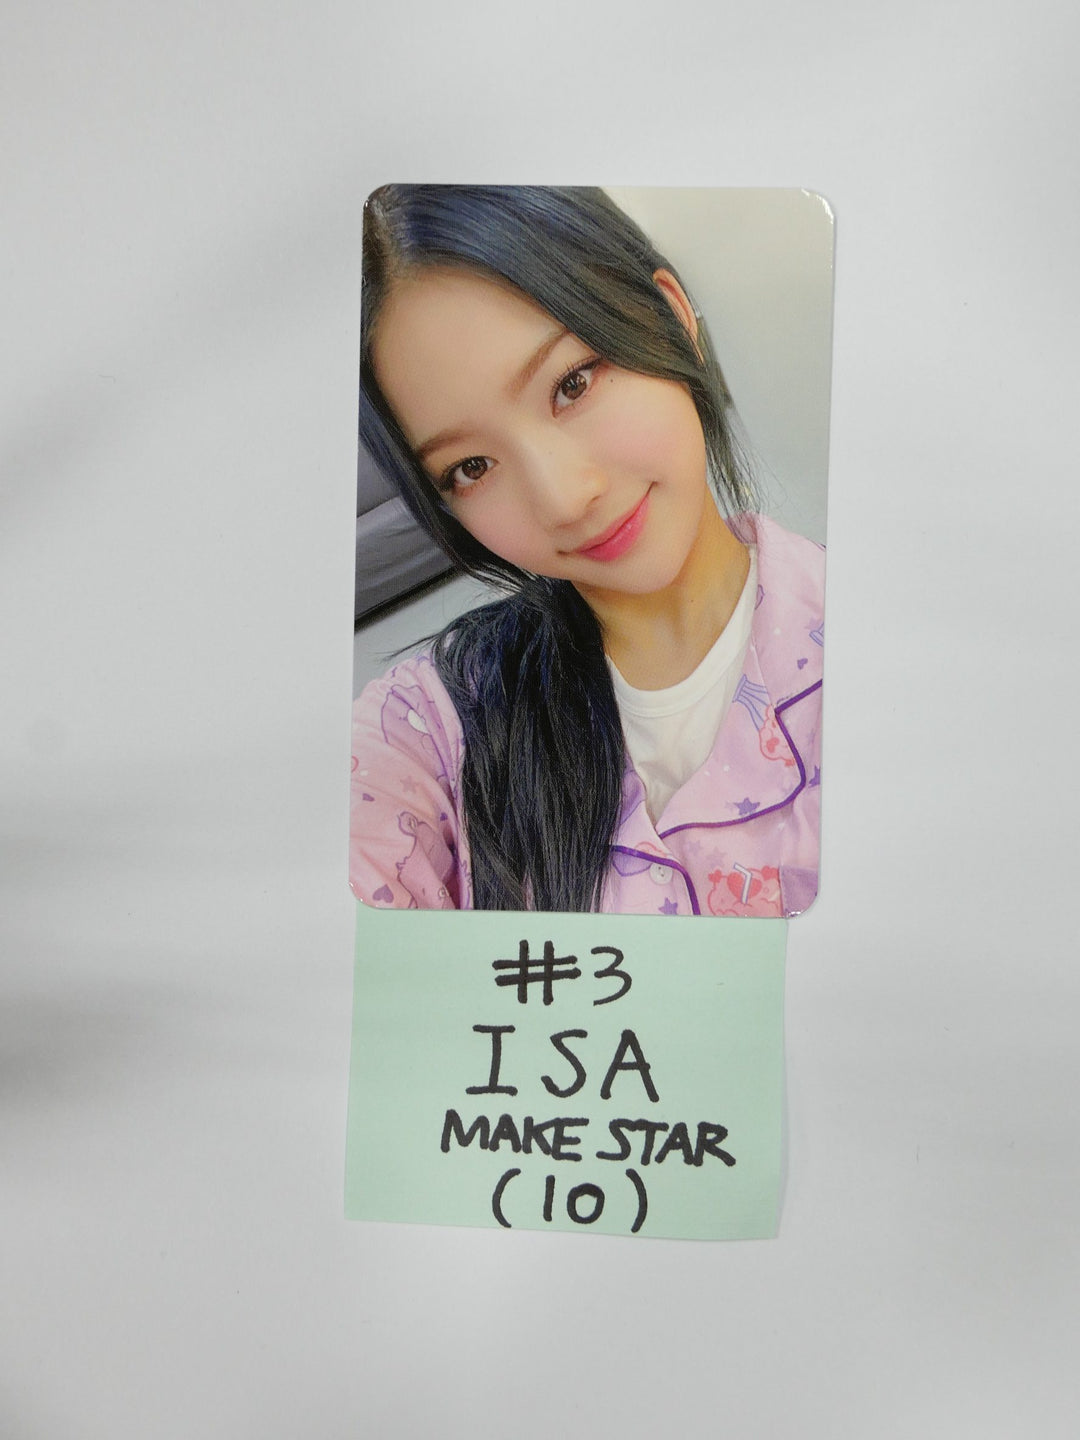 StayC 'STEREOTYPE' - MakeStar Fansign Event Photocard Round 5